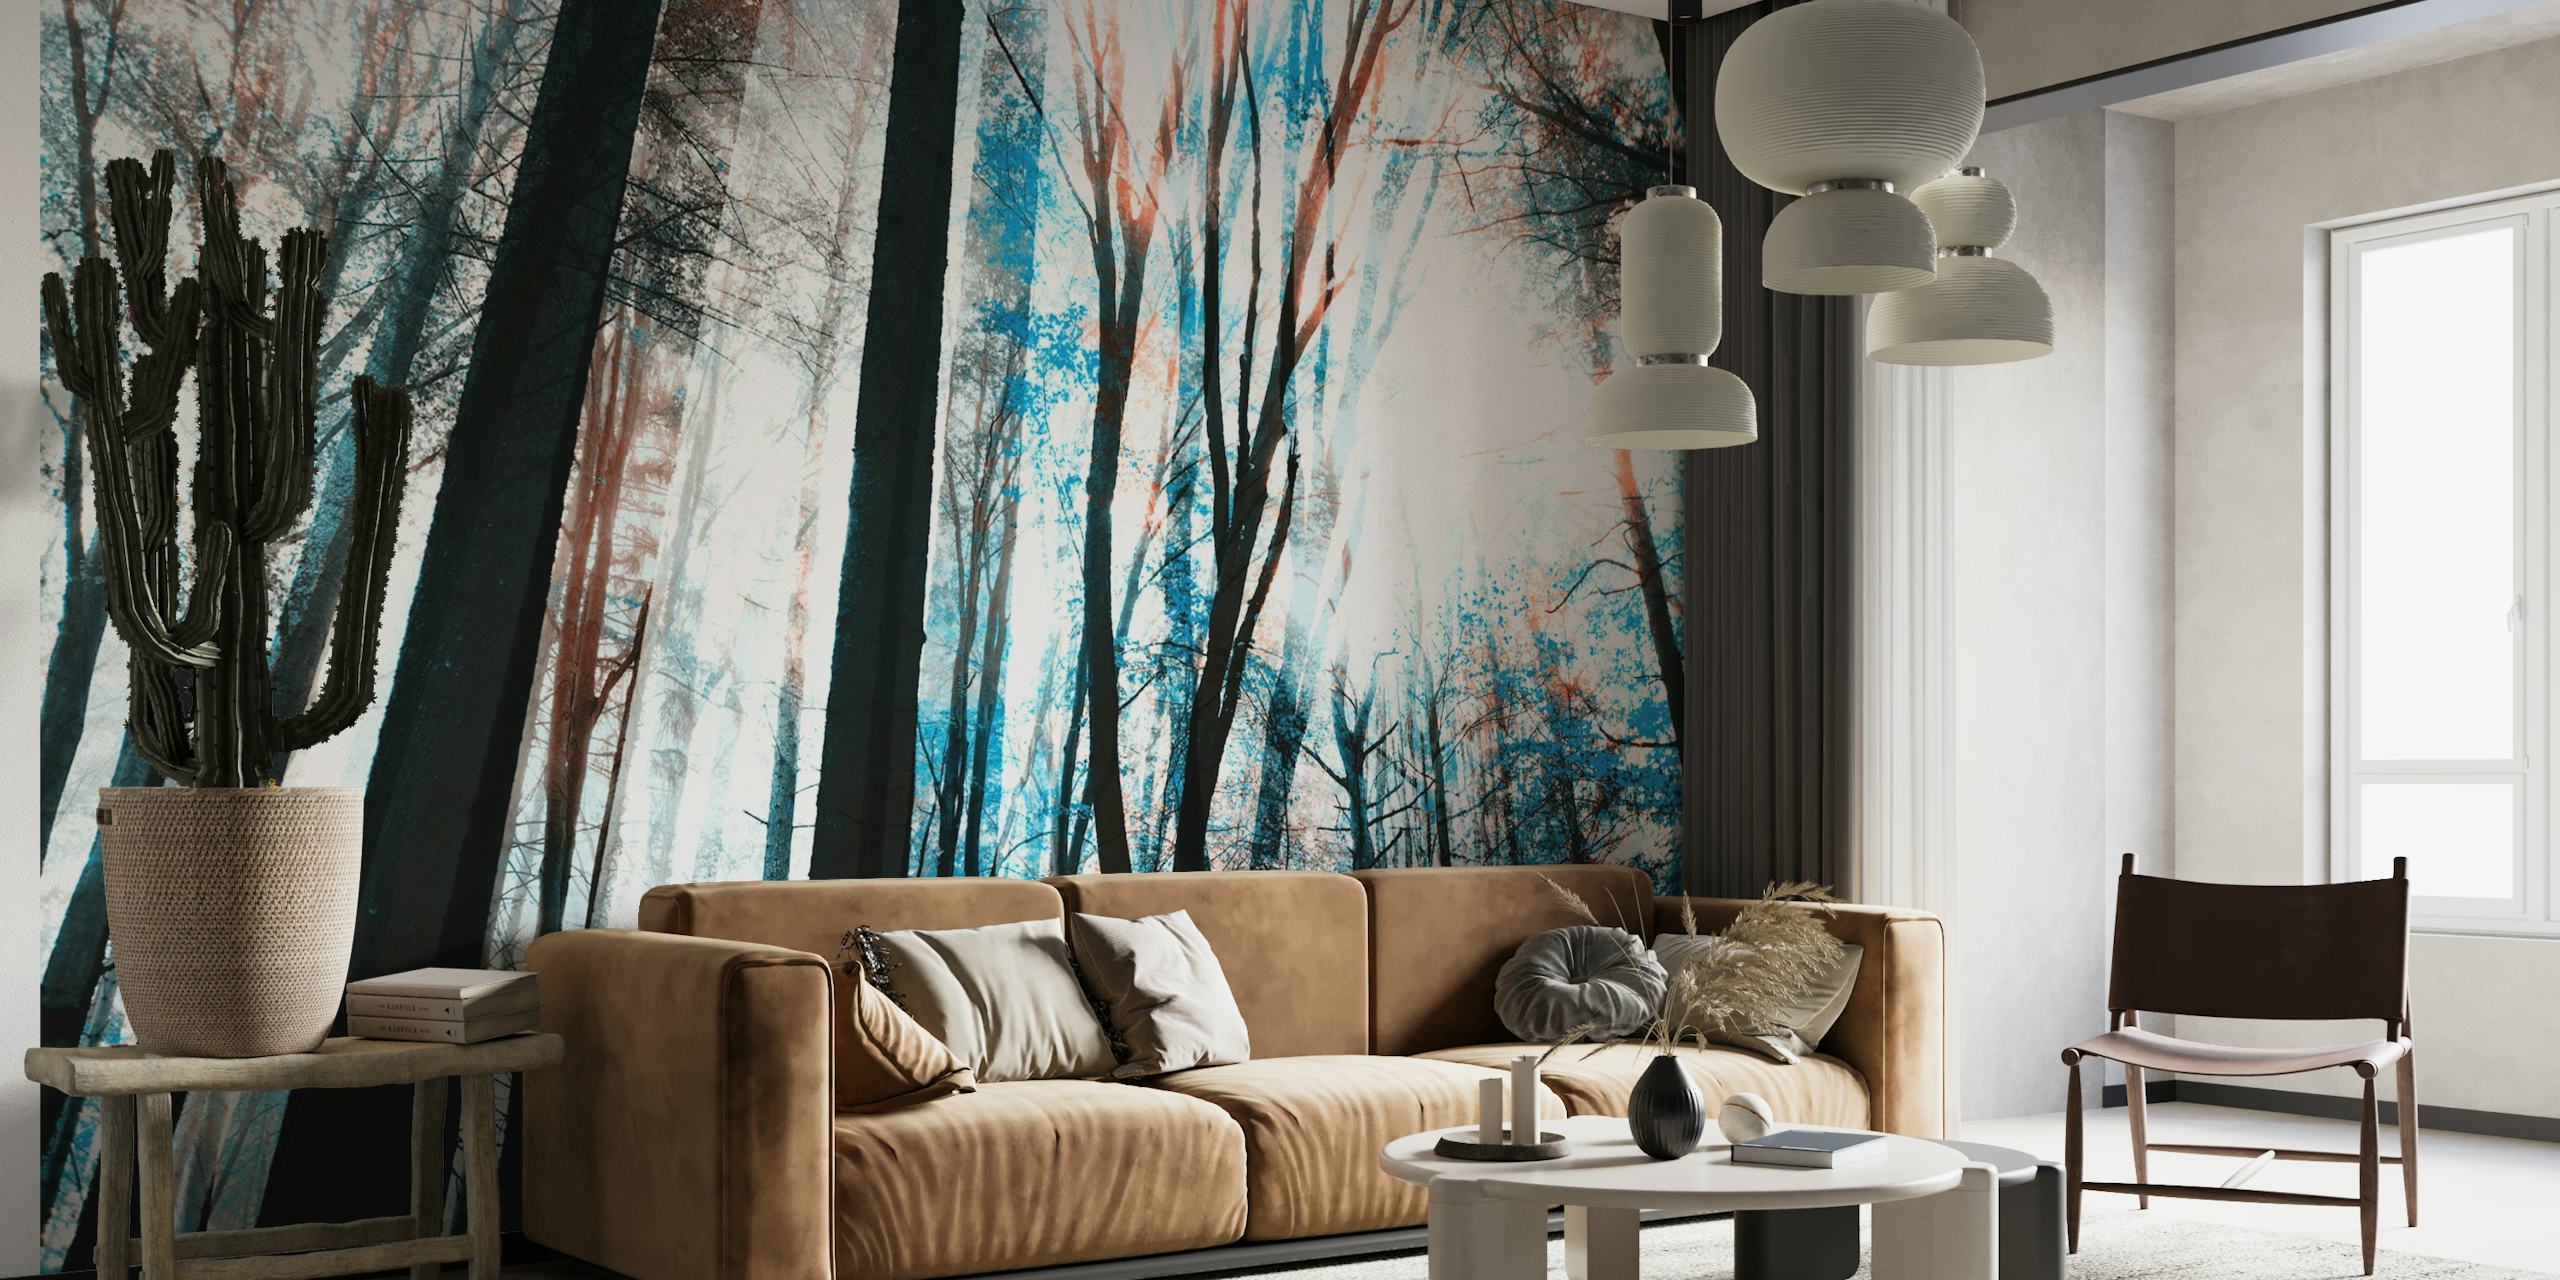 Whimsical forest wall mural with tall trees and ethereal lighting